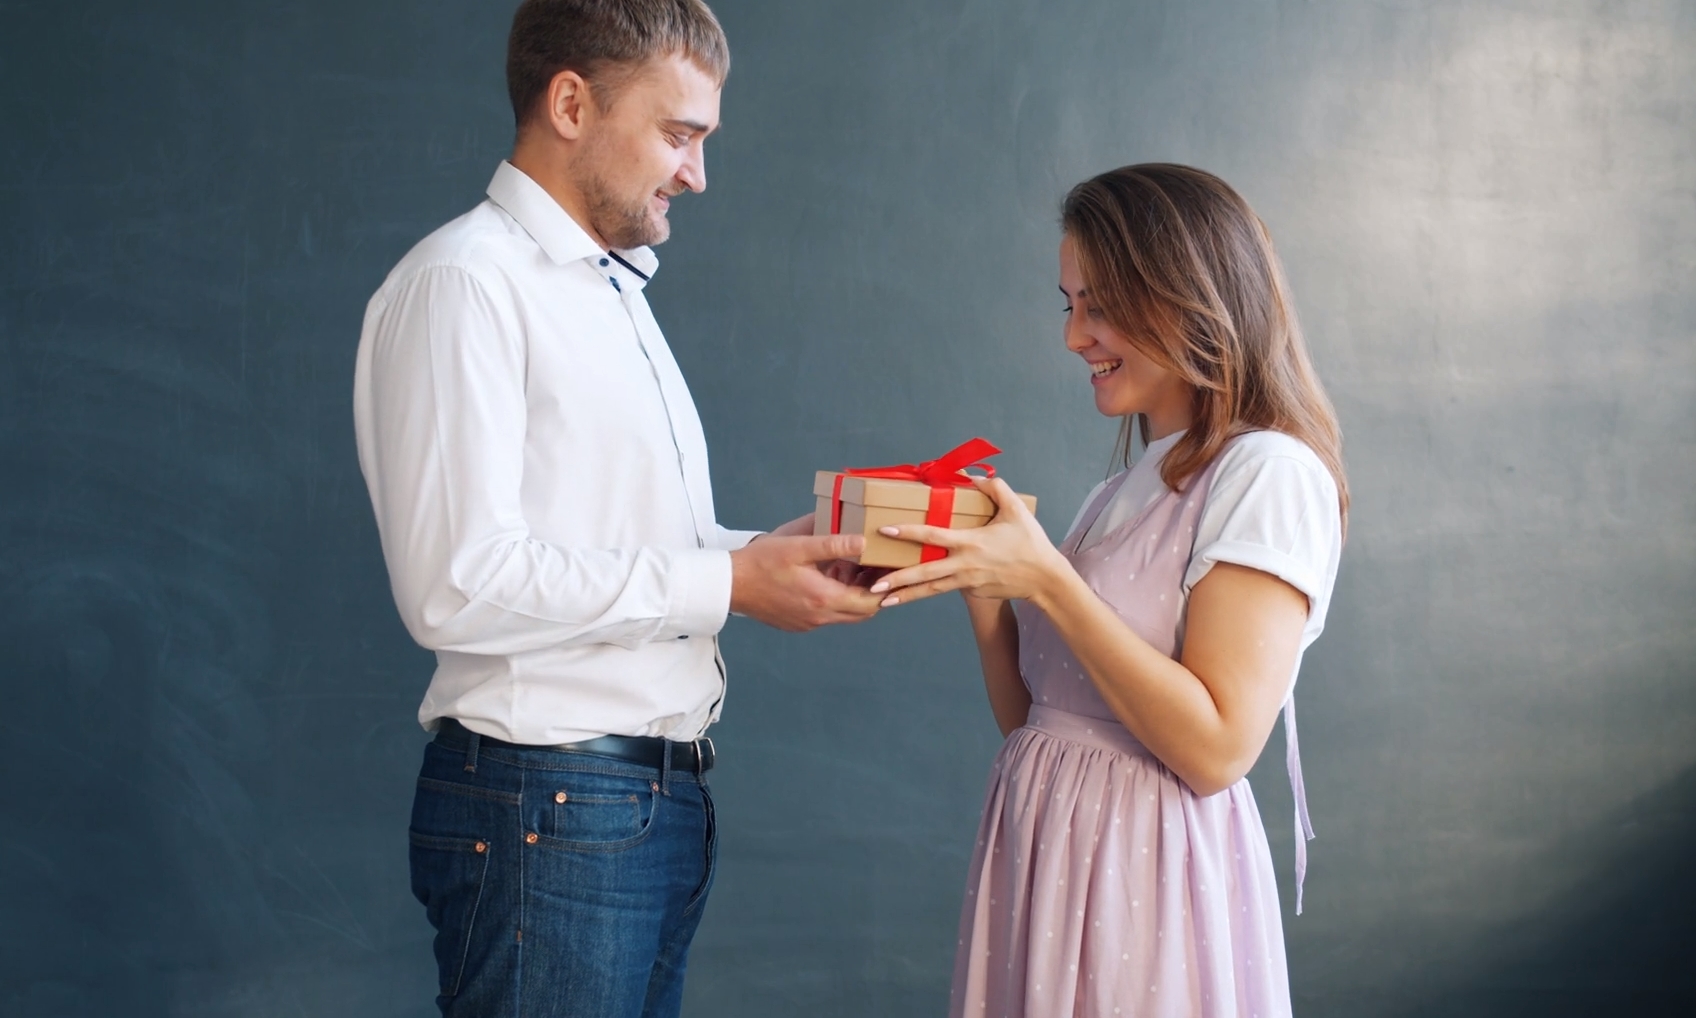 A man joyfully presents a gift to his girlfriend, expressing love and affection.